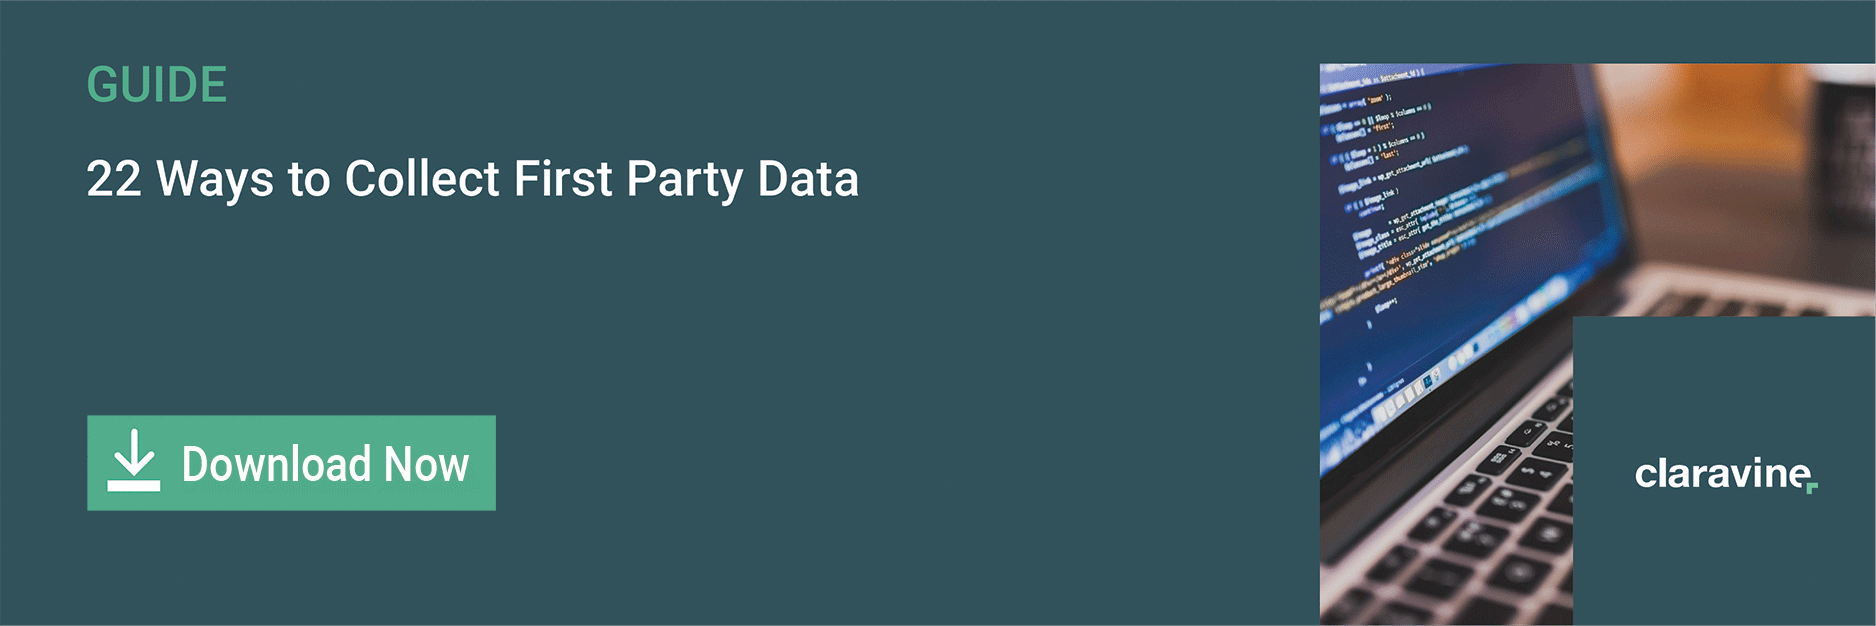 22 ways to collect first party data